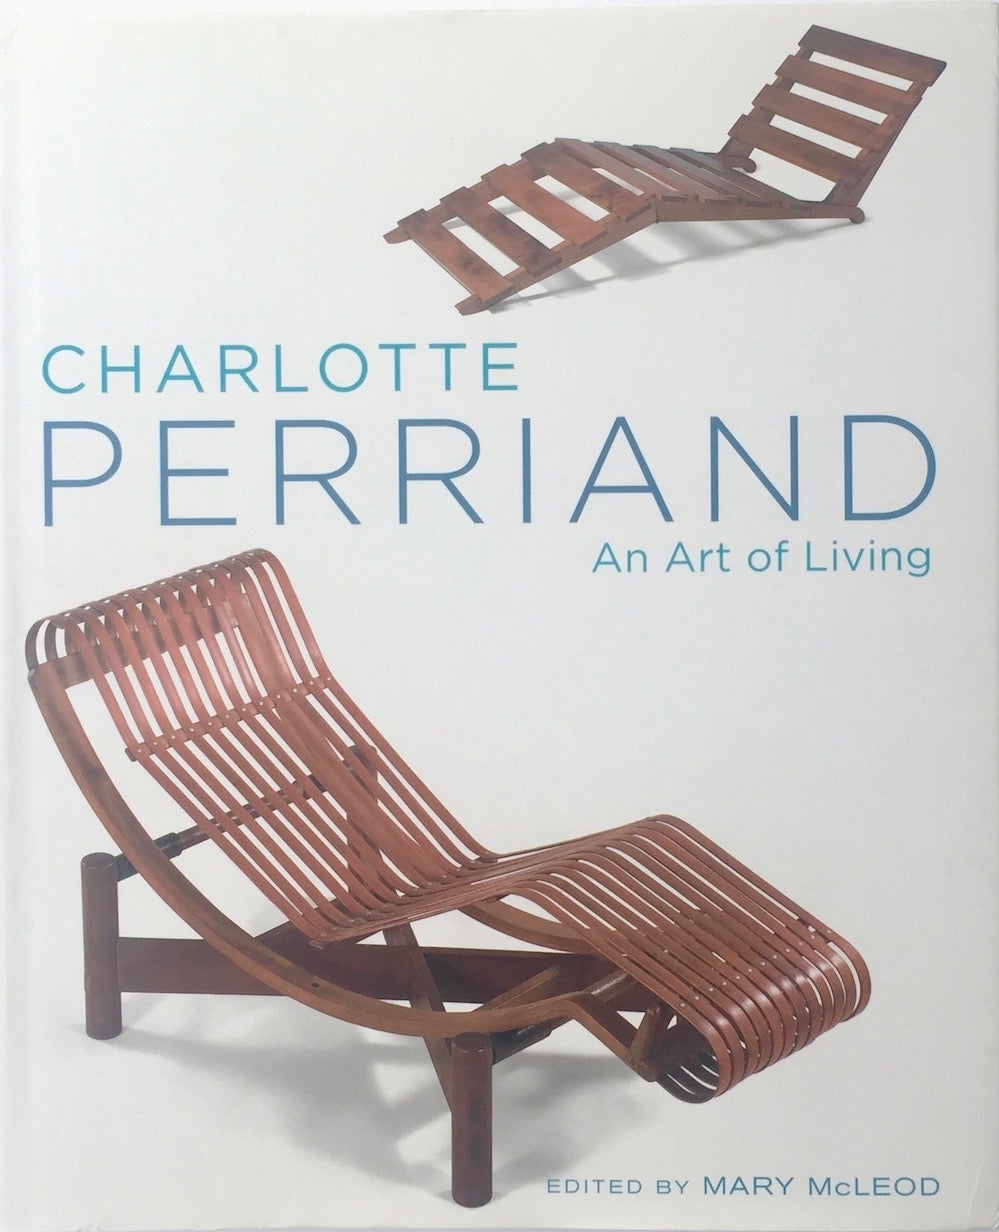 Build it like Perriand